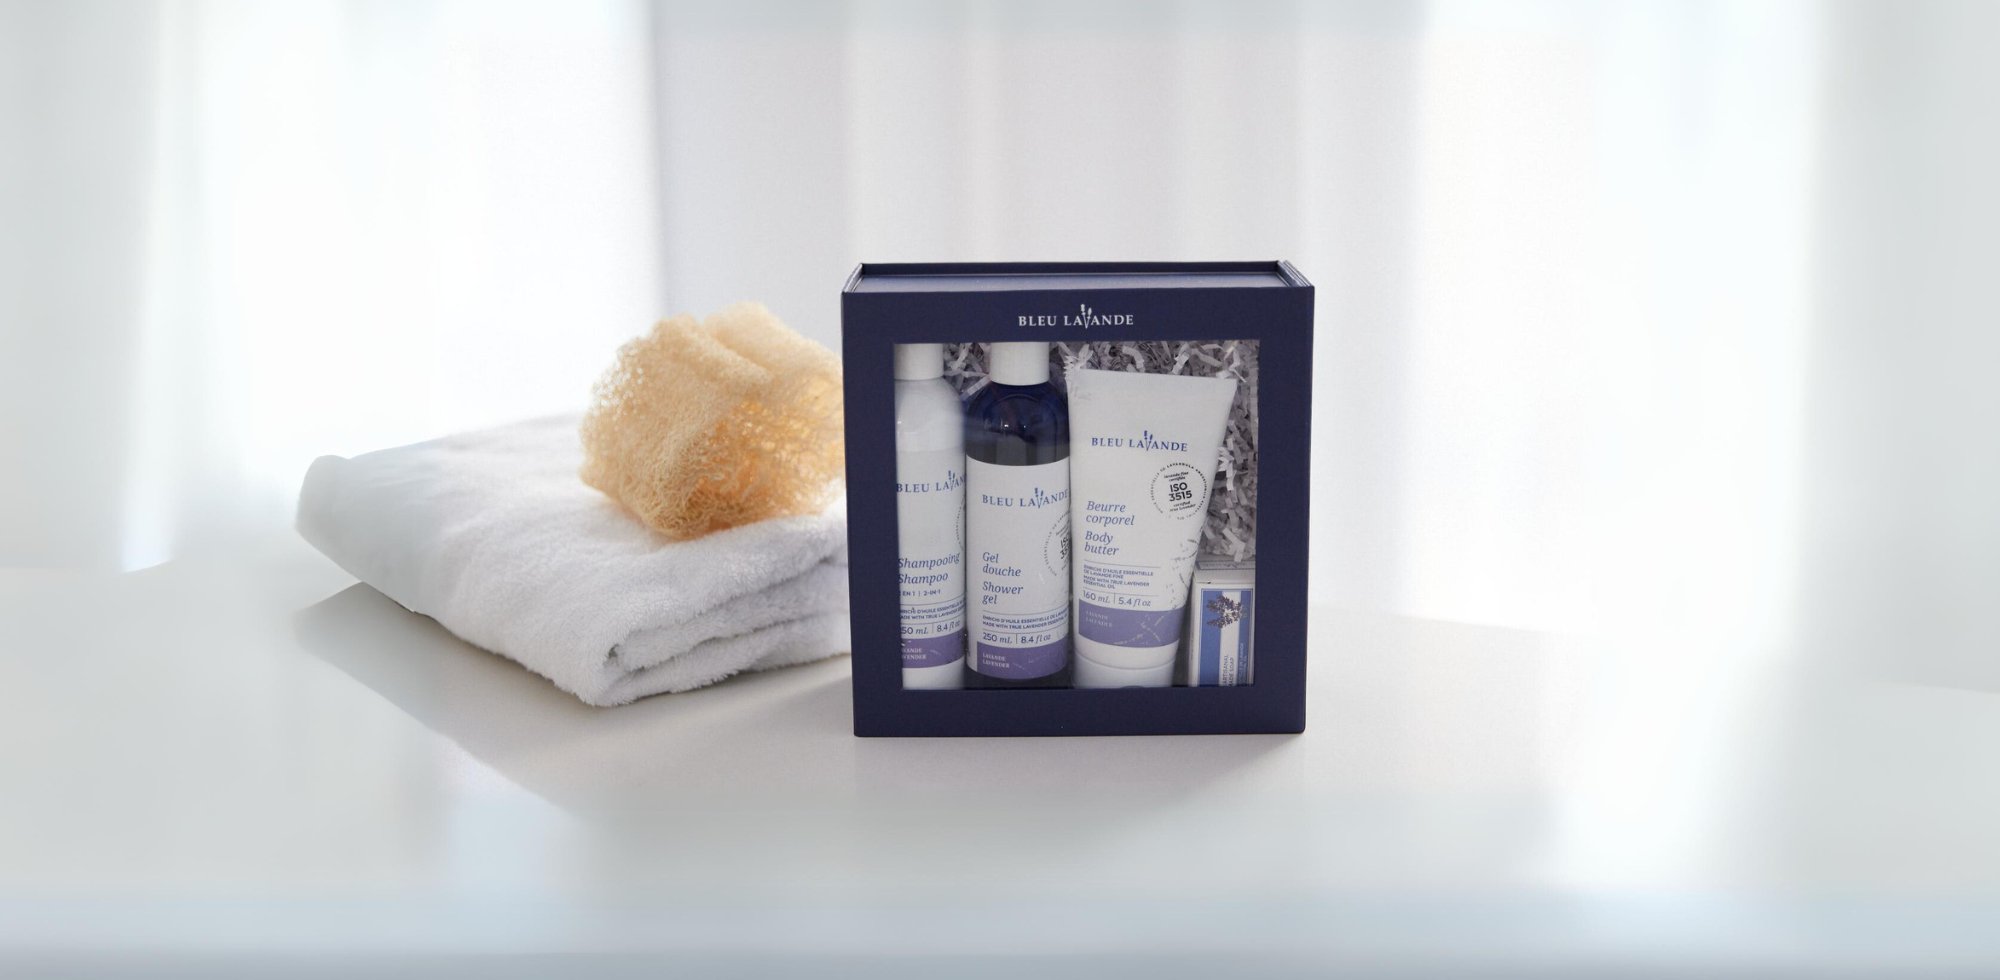 Lavender gift sets with natural ingredients and enriched with essential oil